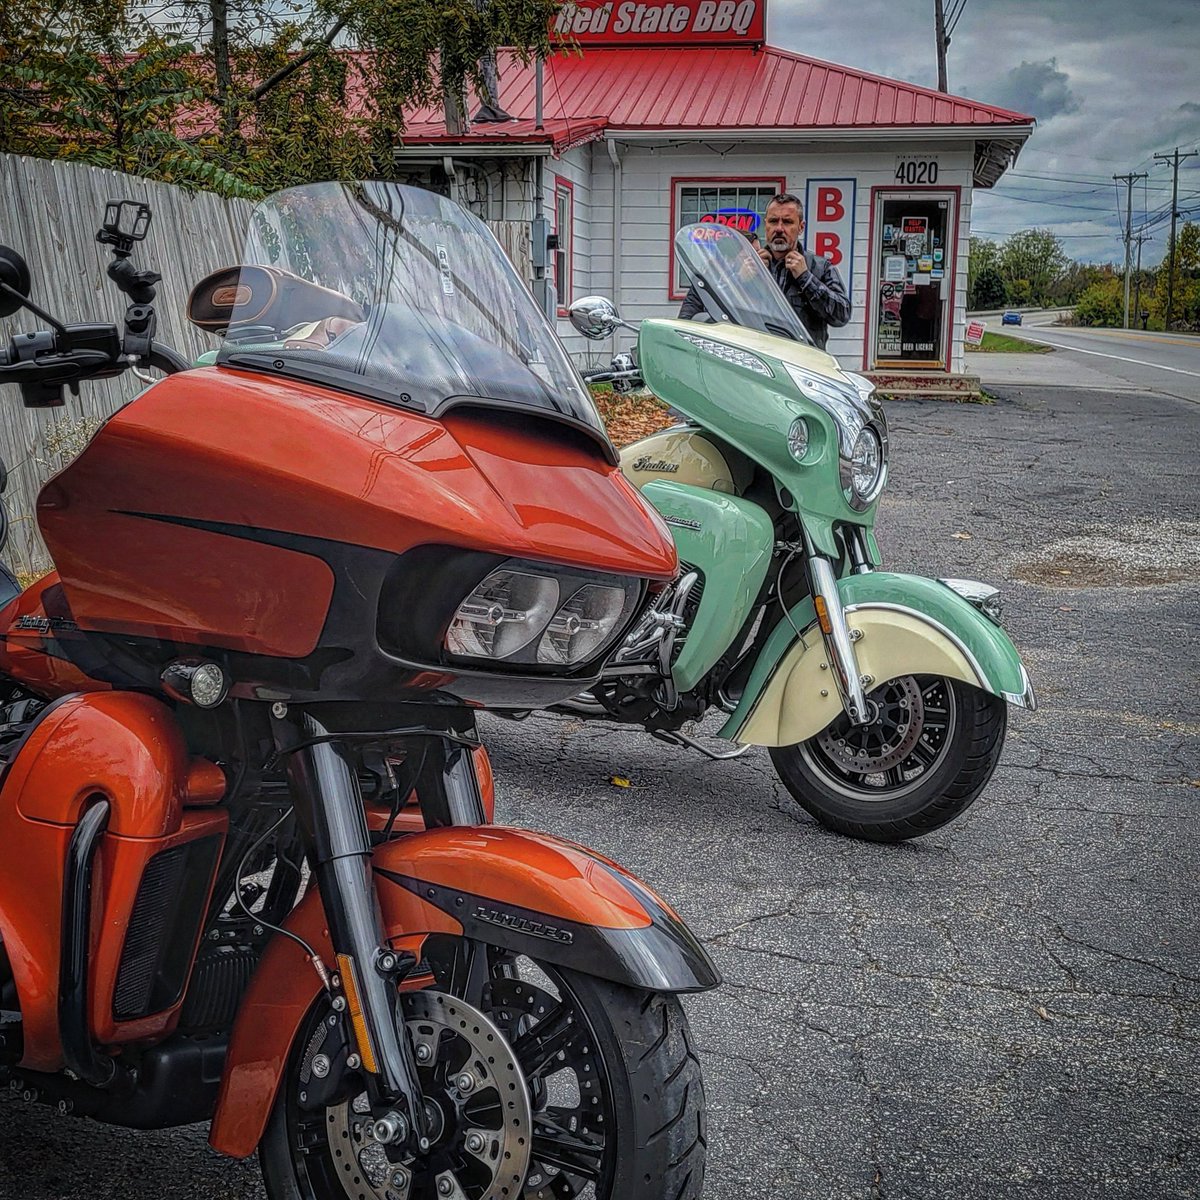 What better way to finish a ride than with a good meal?
.
#MotorcycleDen #harleydavidson #indianmotorcycle #roadglidelimited #indianroadmaster #roadglide #kentucky #bbq #bbqlovers #motorcycleride #motorcyclelife #2wheellife